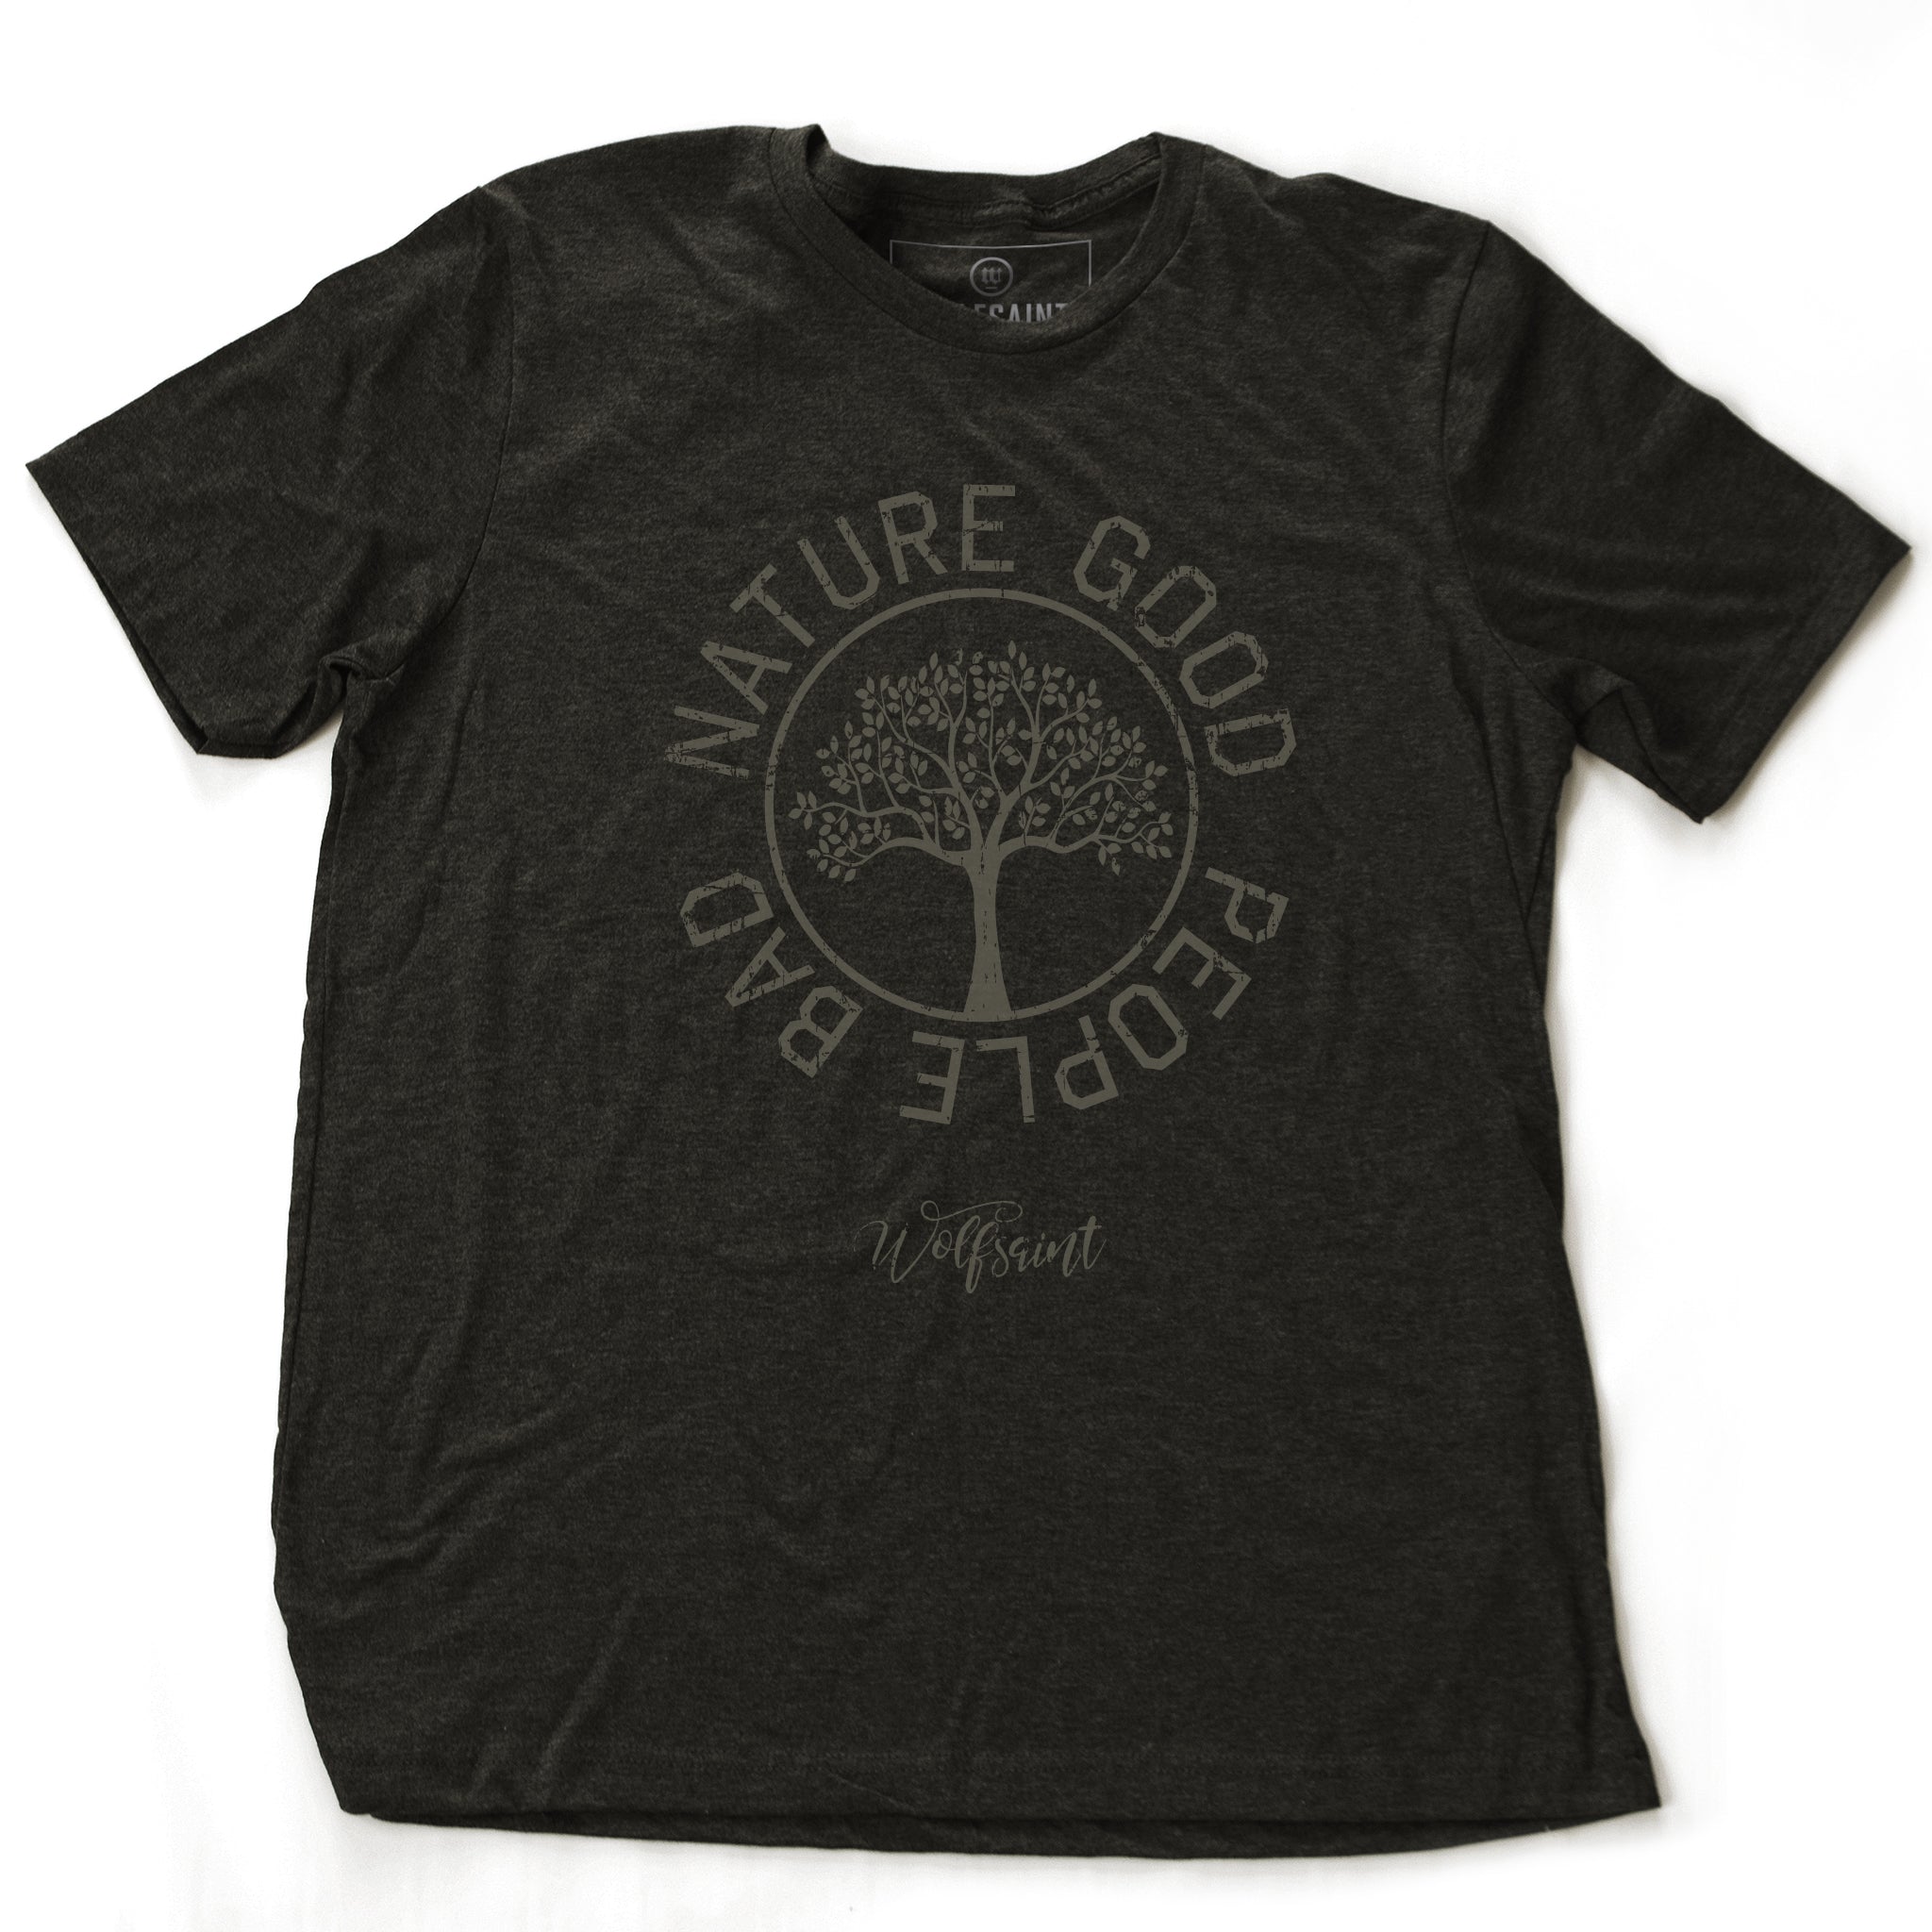 A fashionable vintage-inspired, retro t-shirt in Dark Heather Gray, featuring a graphic of a thriving tree in a circle, surrounded by the sarcastic text: “NATURE GOOD, PEOPLE BAD” with the Wolfsaint brand script logo beneath. From wolfsaint.net